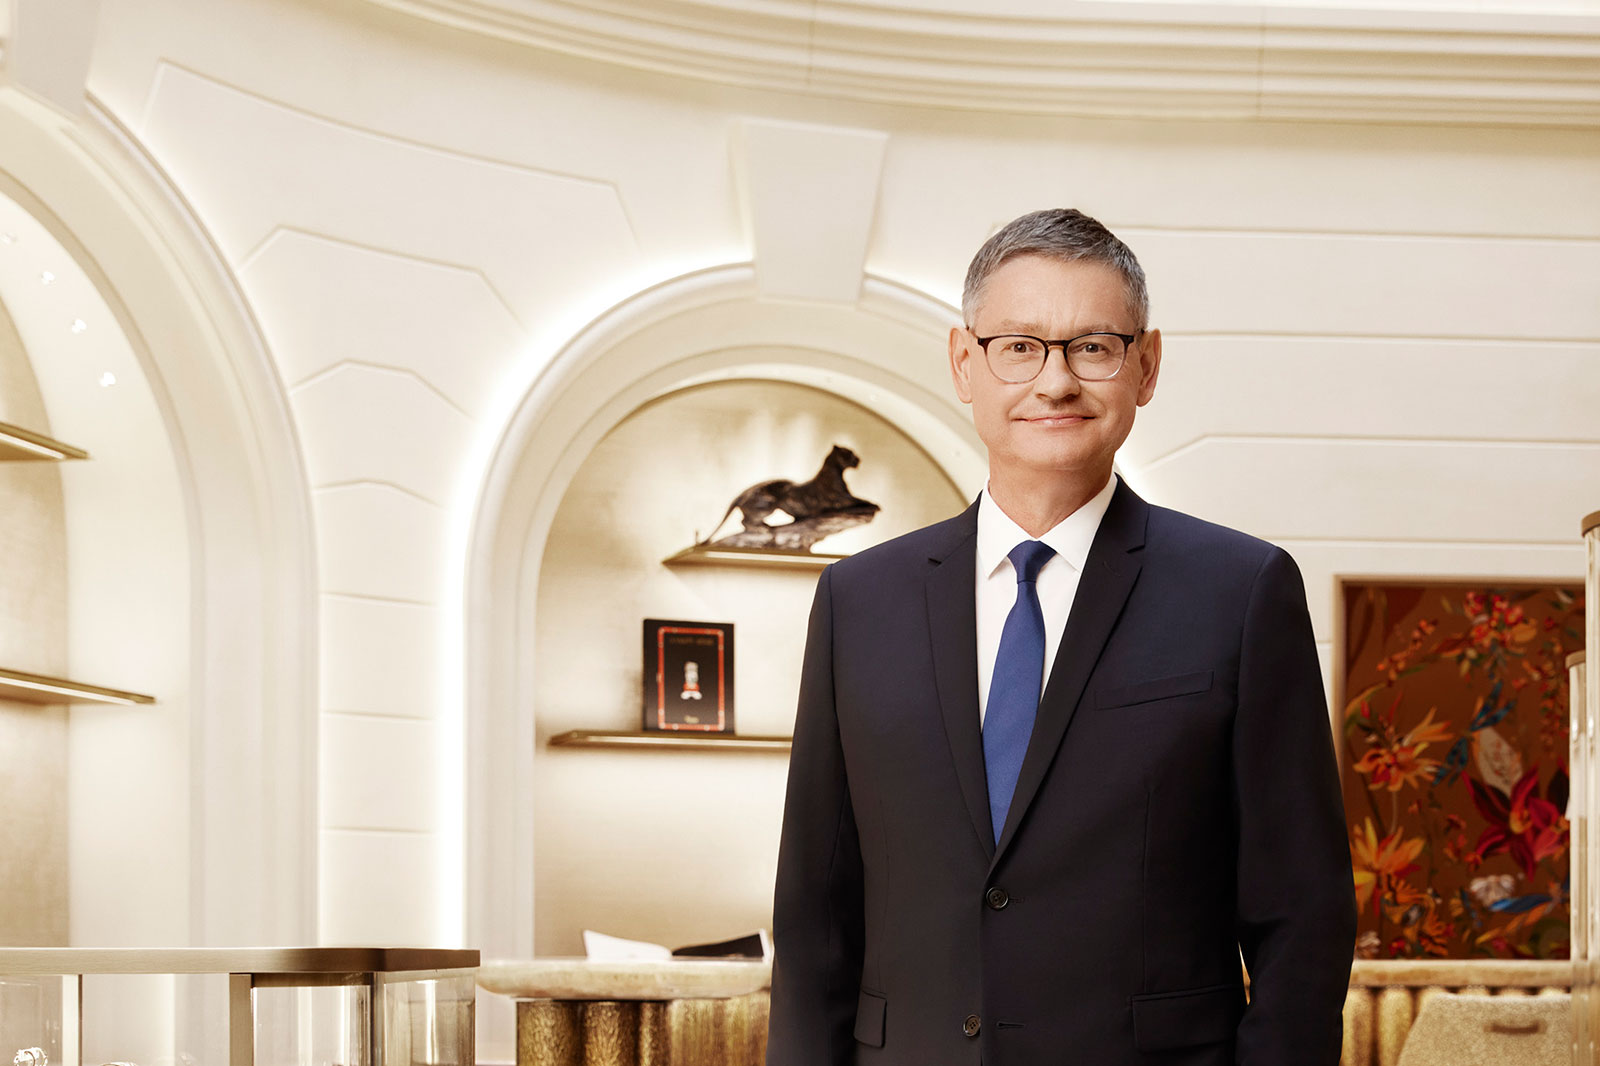 The business of creating desire': An interview with the CEO of LVMH